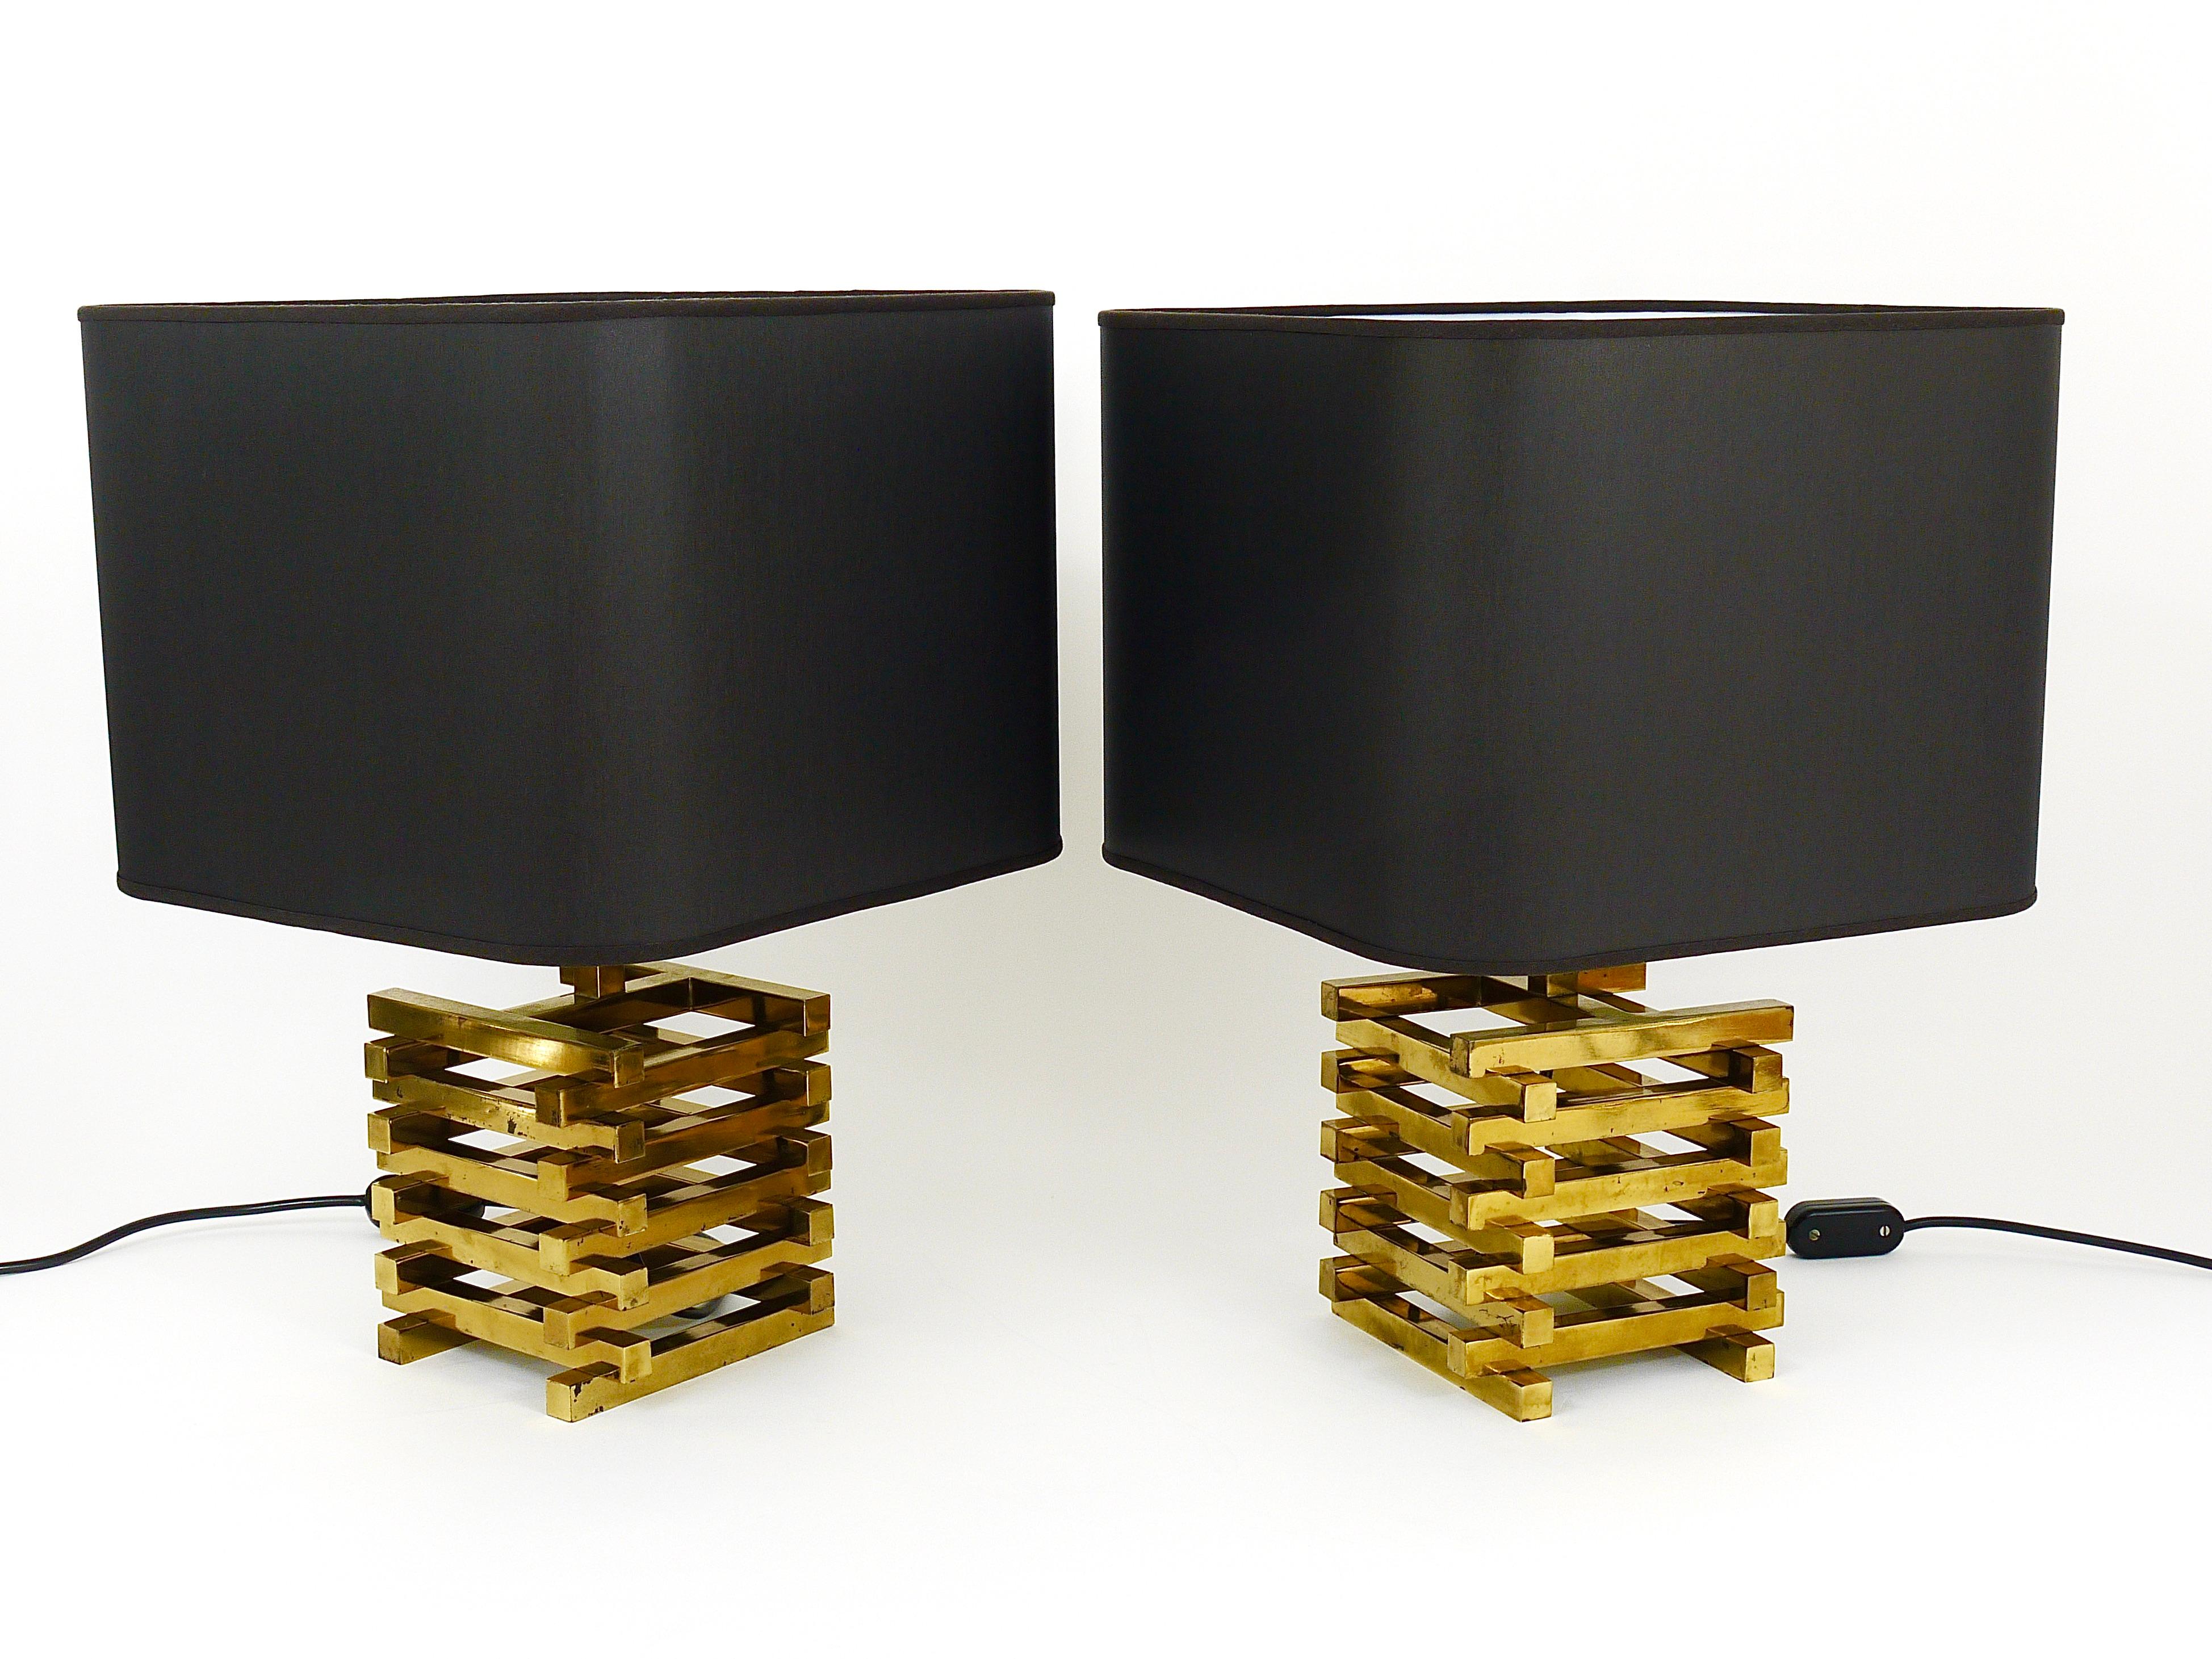 A pair of hollywood regency brass table / side lamps from the 1970s by Romeo Rega, Italy. The lamps consist of beautiful and solid square brass cage bases with black refurbished lampshades. In good condition with charming patina on the brass.